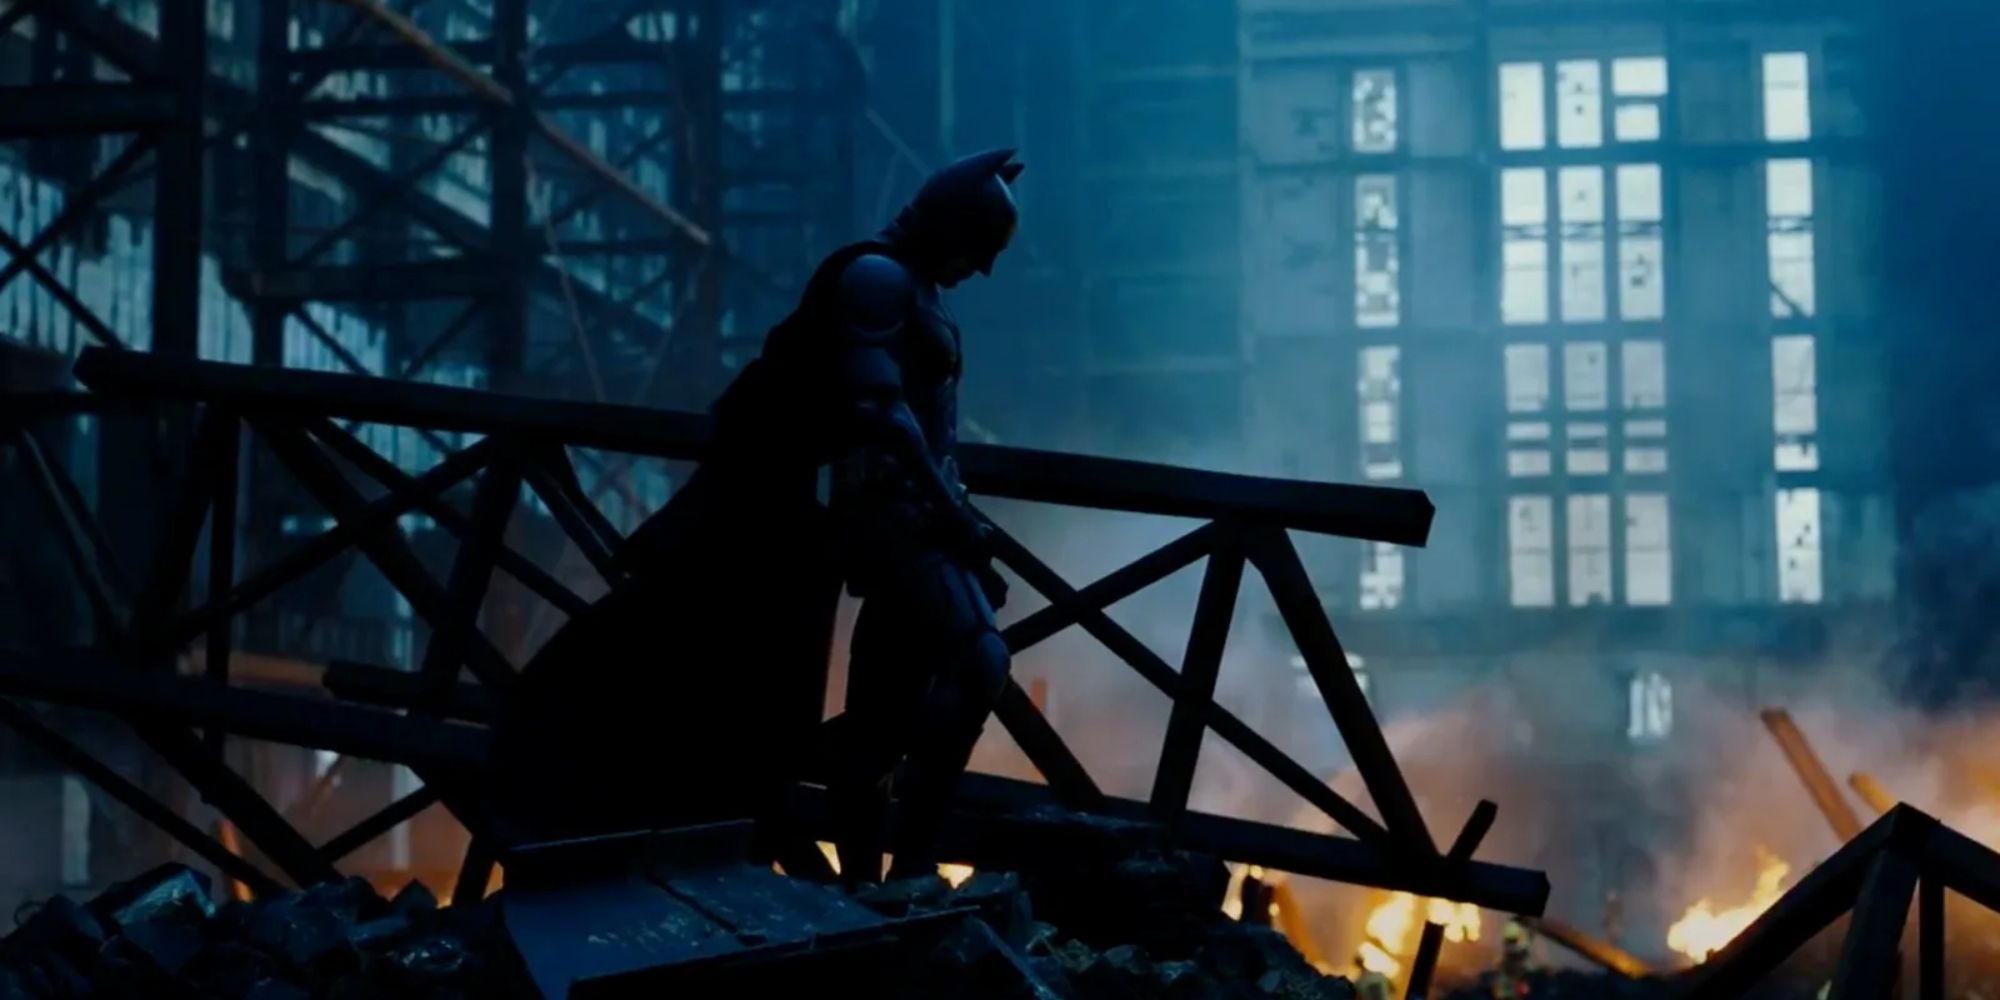 The Dark Knight remains one of the greatest superhero movies of all time